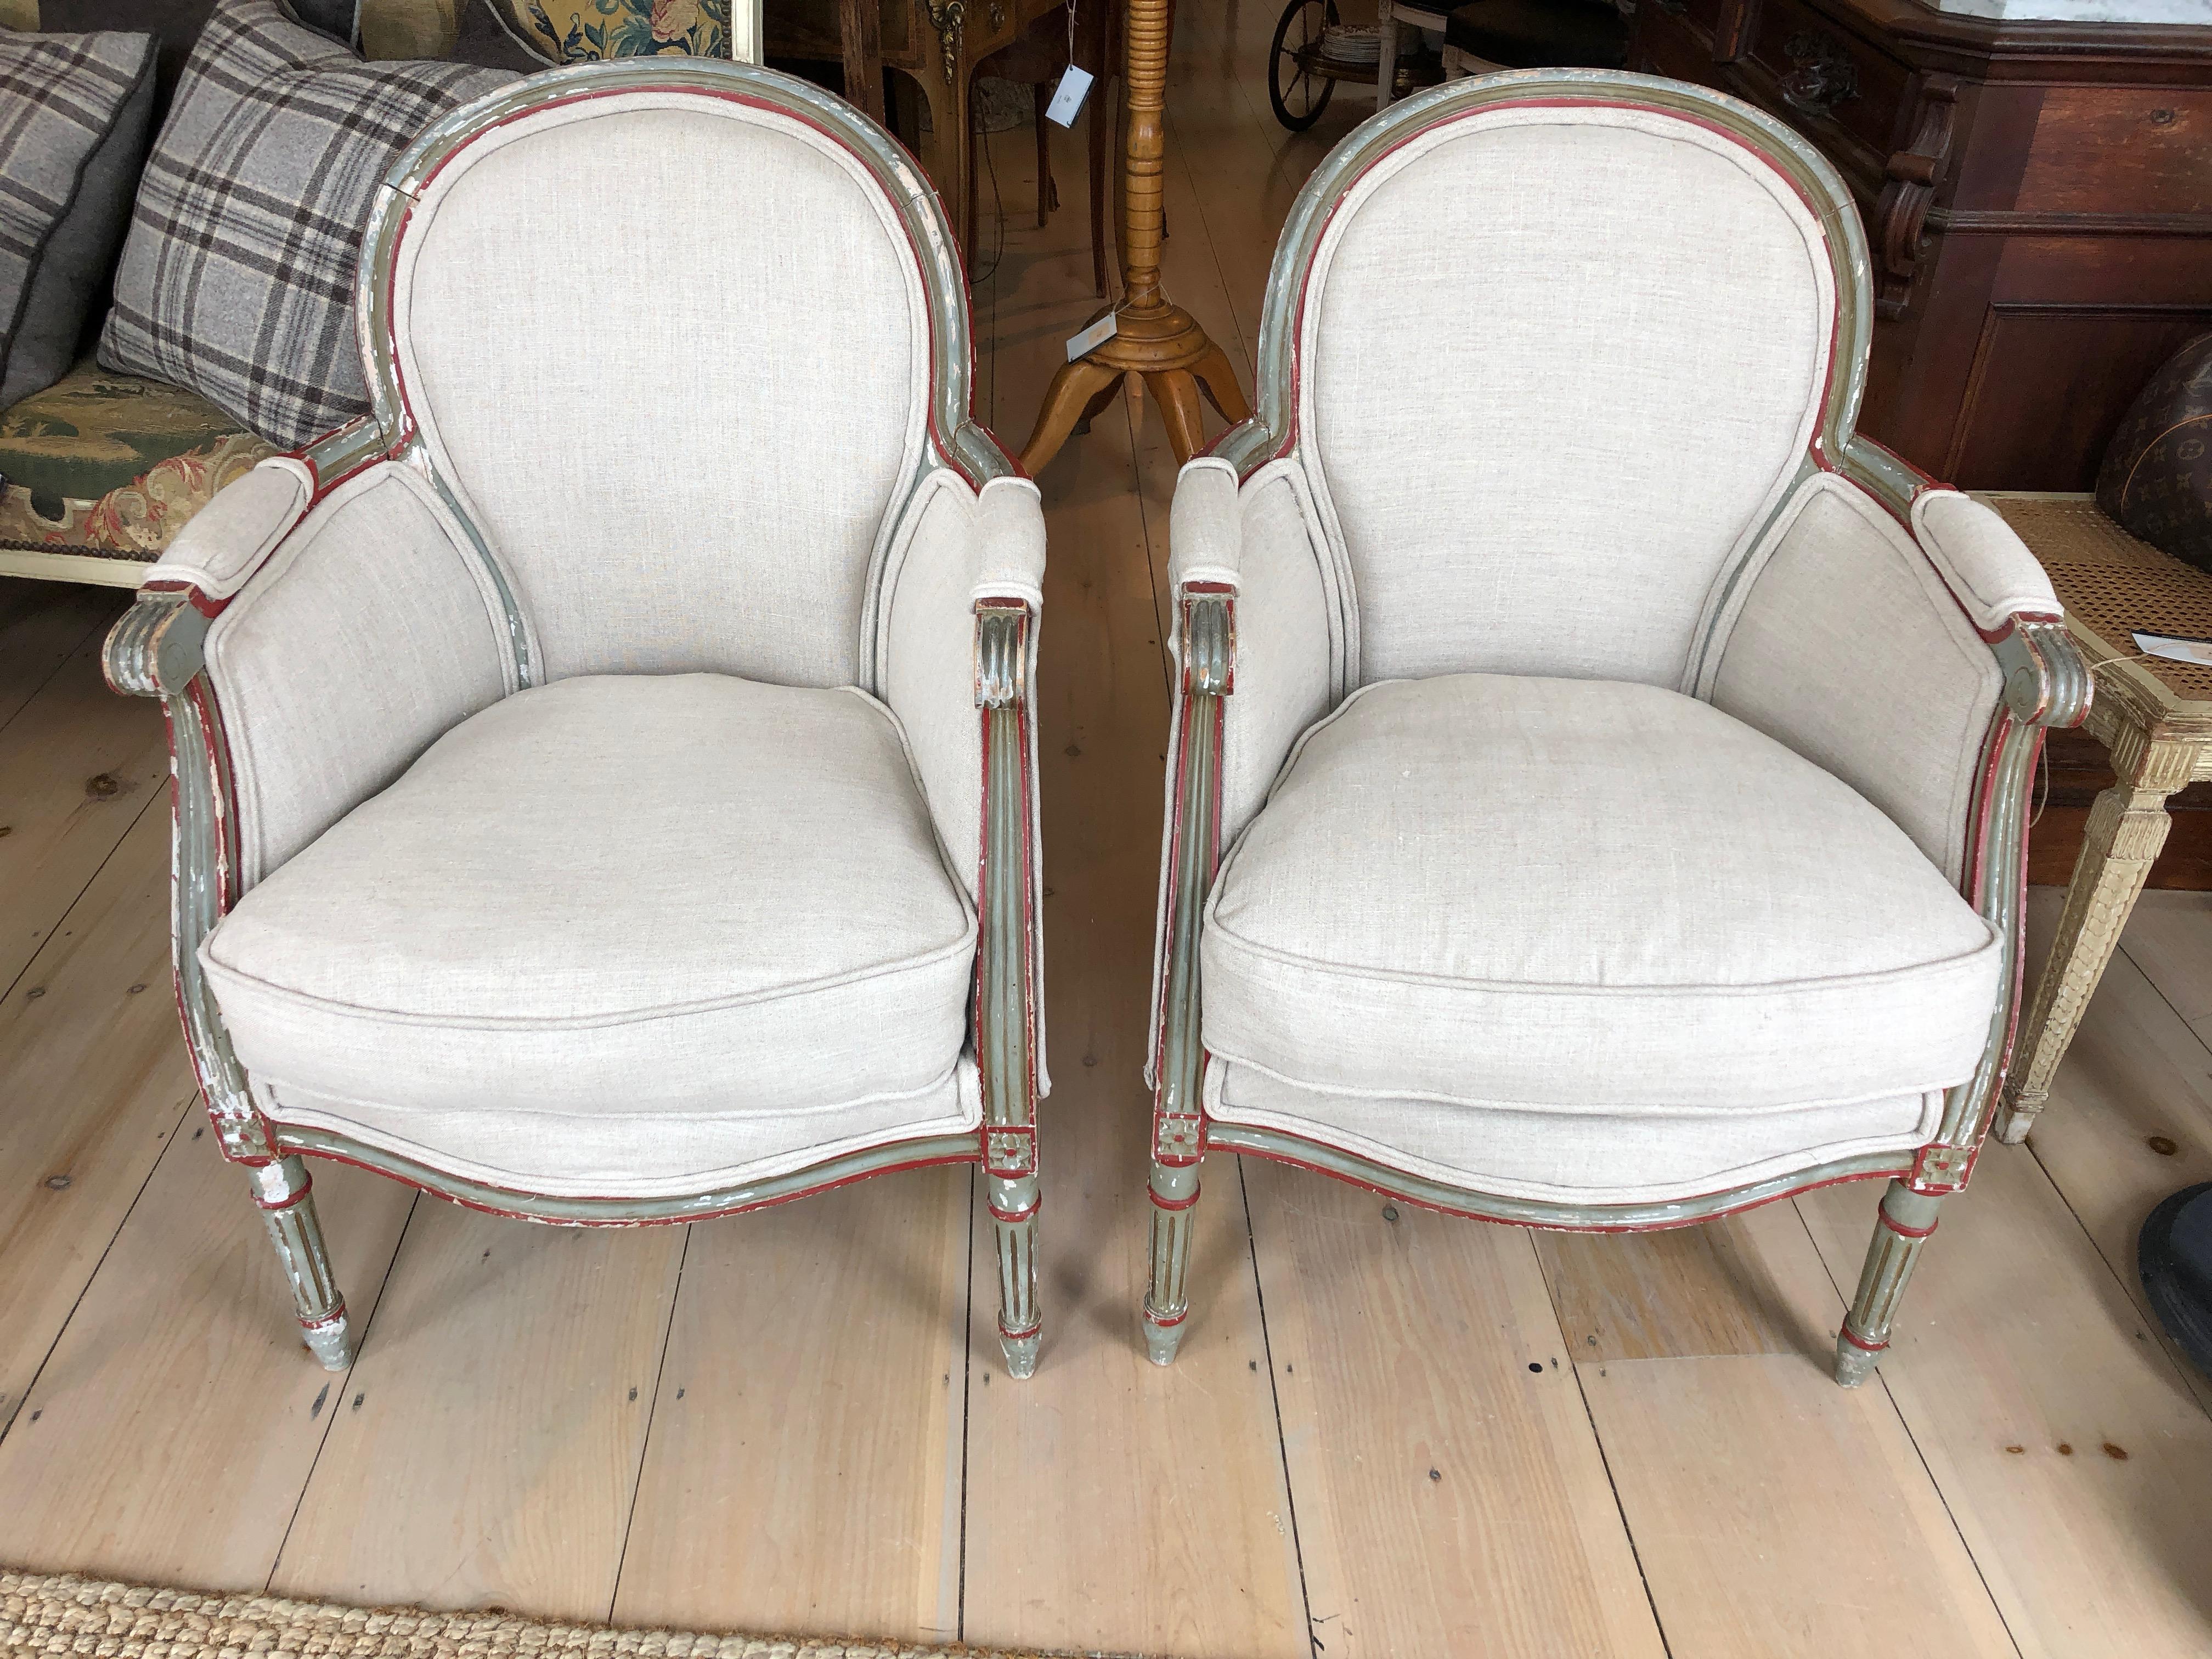 A charming diminutive apartment sized pair of vintage bergeres having painted wood frames in wonderful contrasting hookers green and red oxide, newly upholstered in neutral beige linen. Window pane backs and chippy paint here and there add oodles of